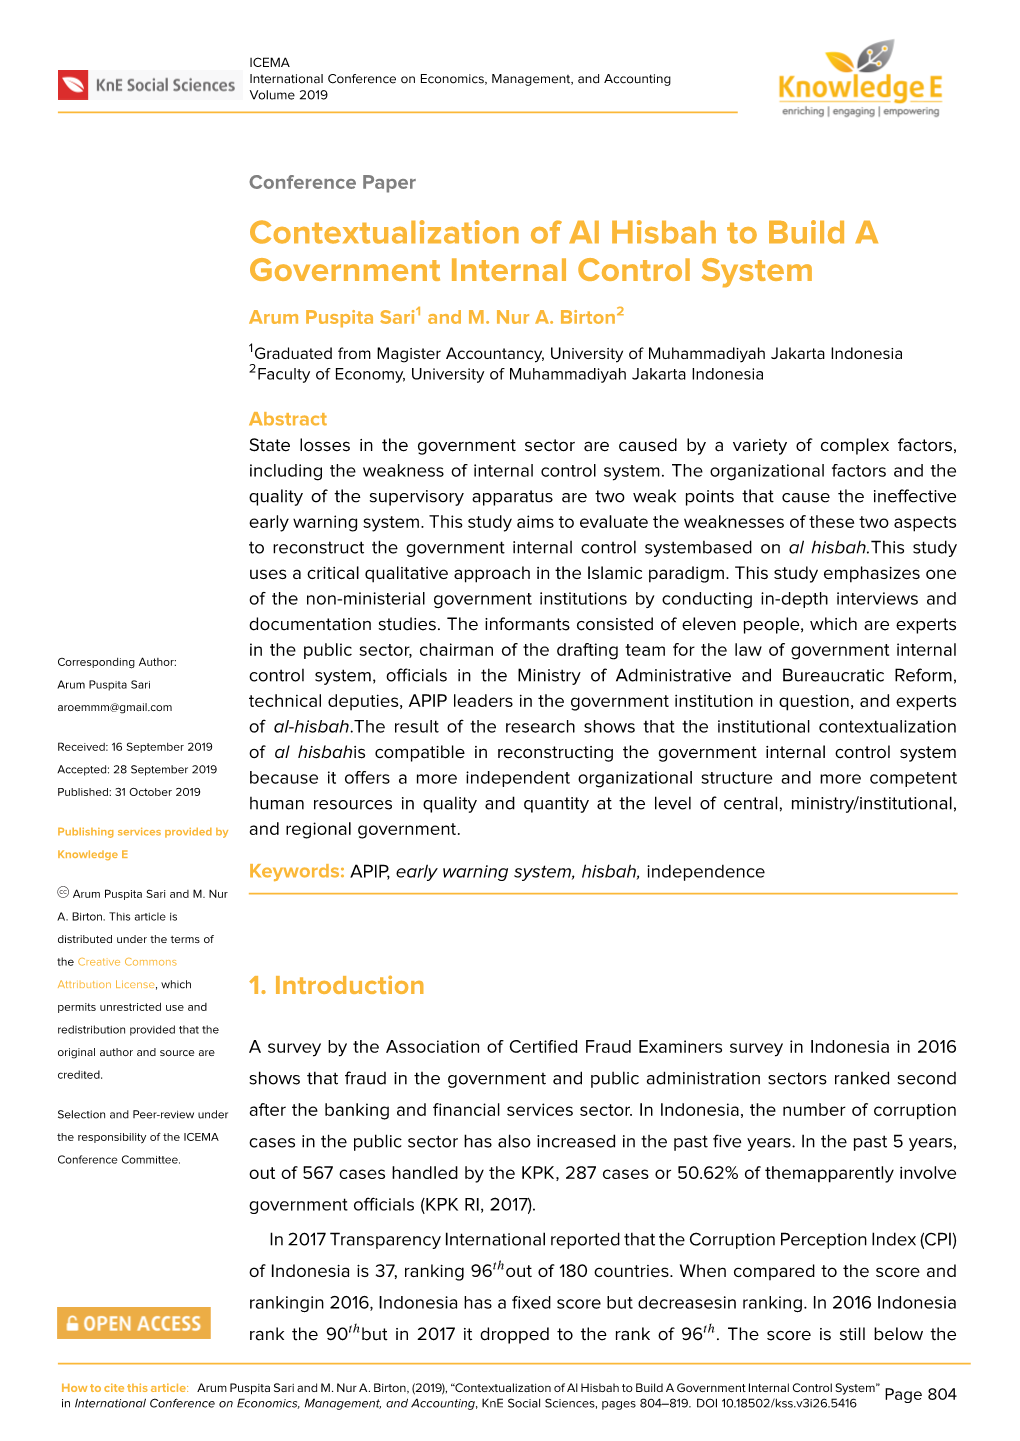 Contextualization of Al Hisbah to Build a Government Internal Control System Arum Puspita Sari1 and M